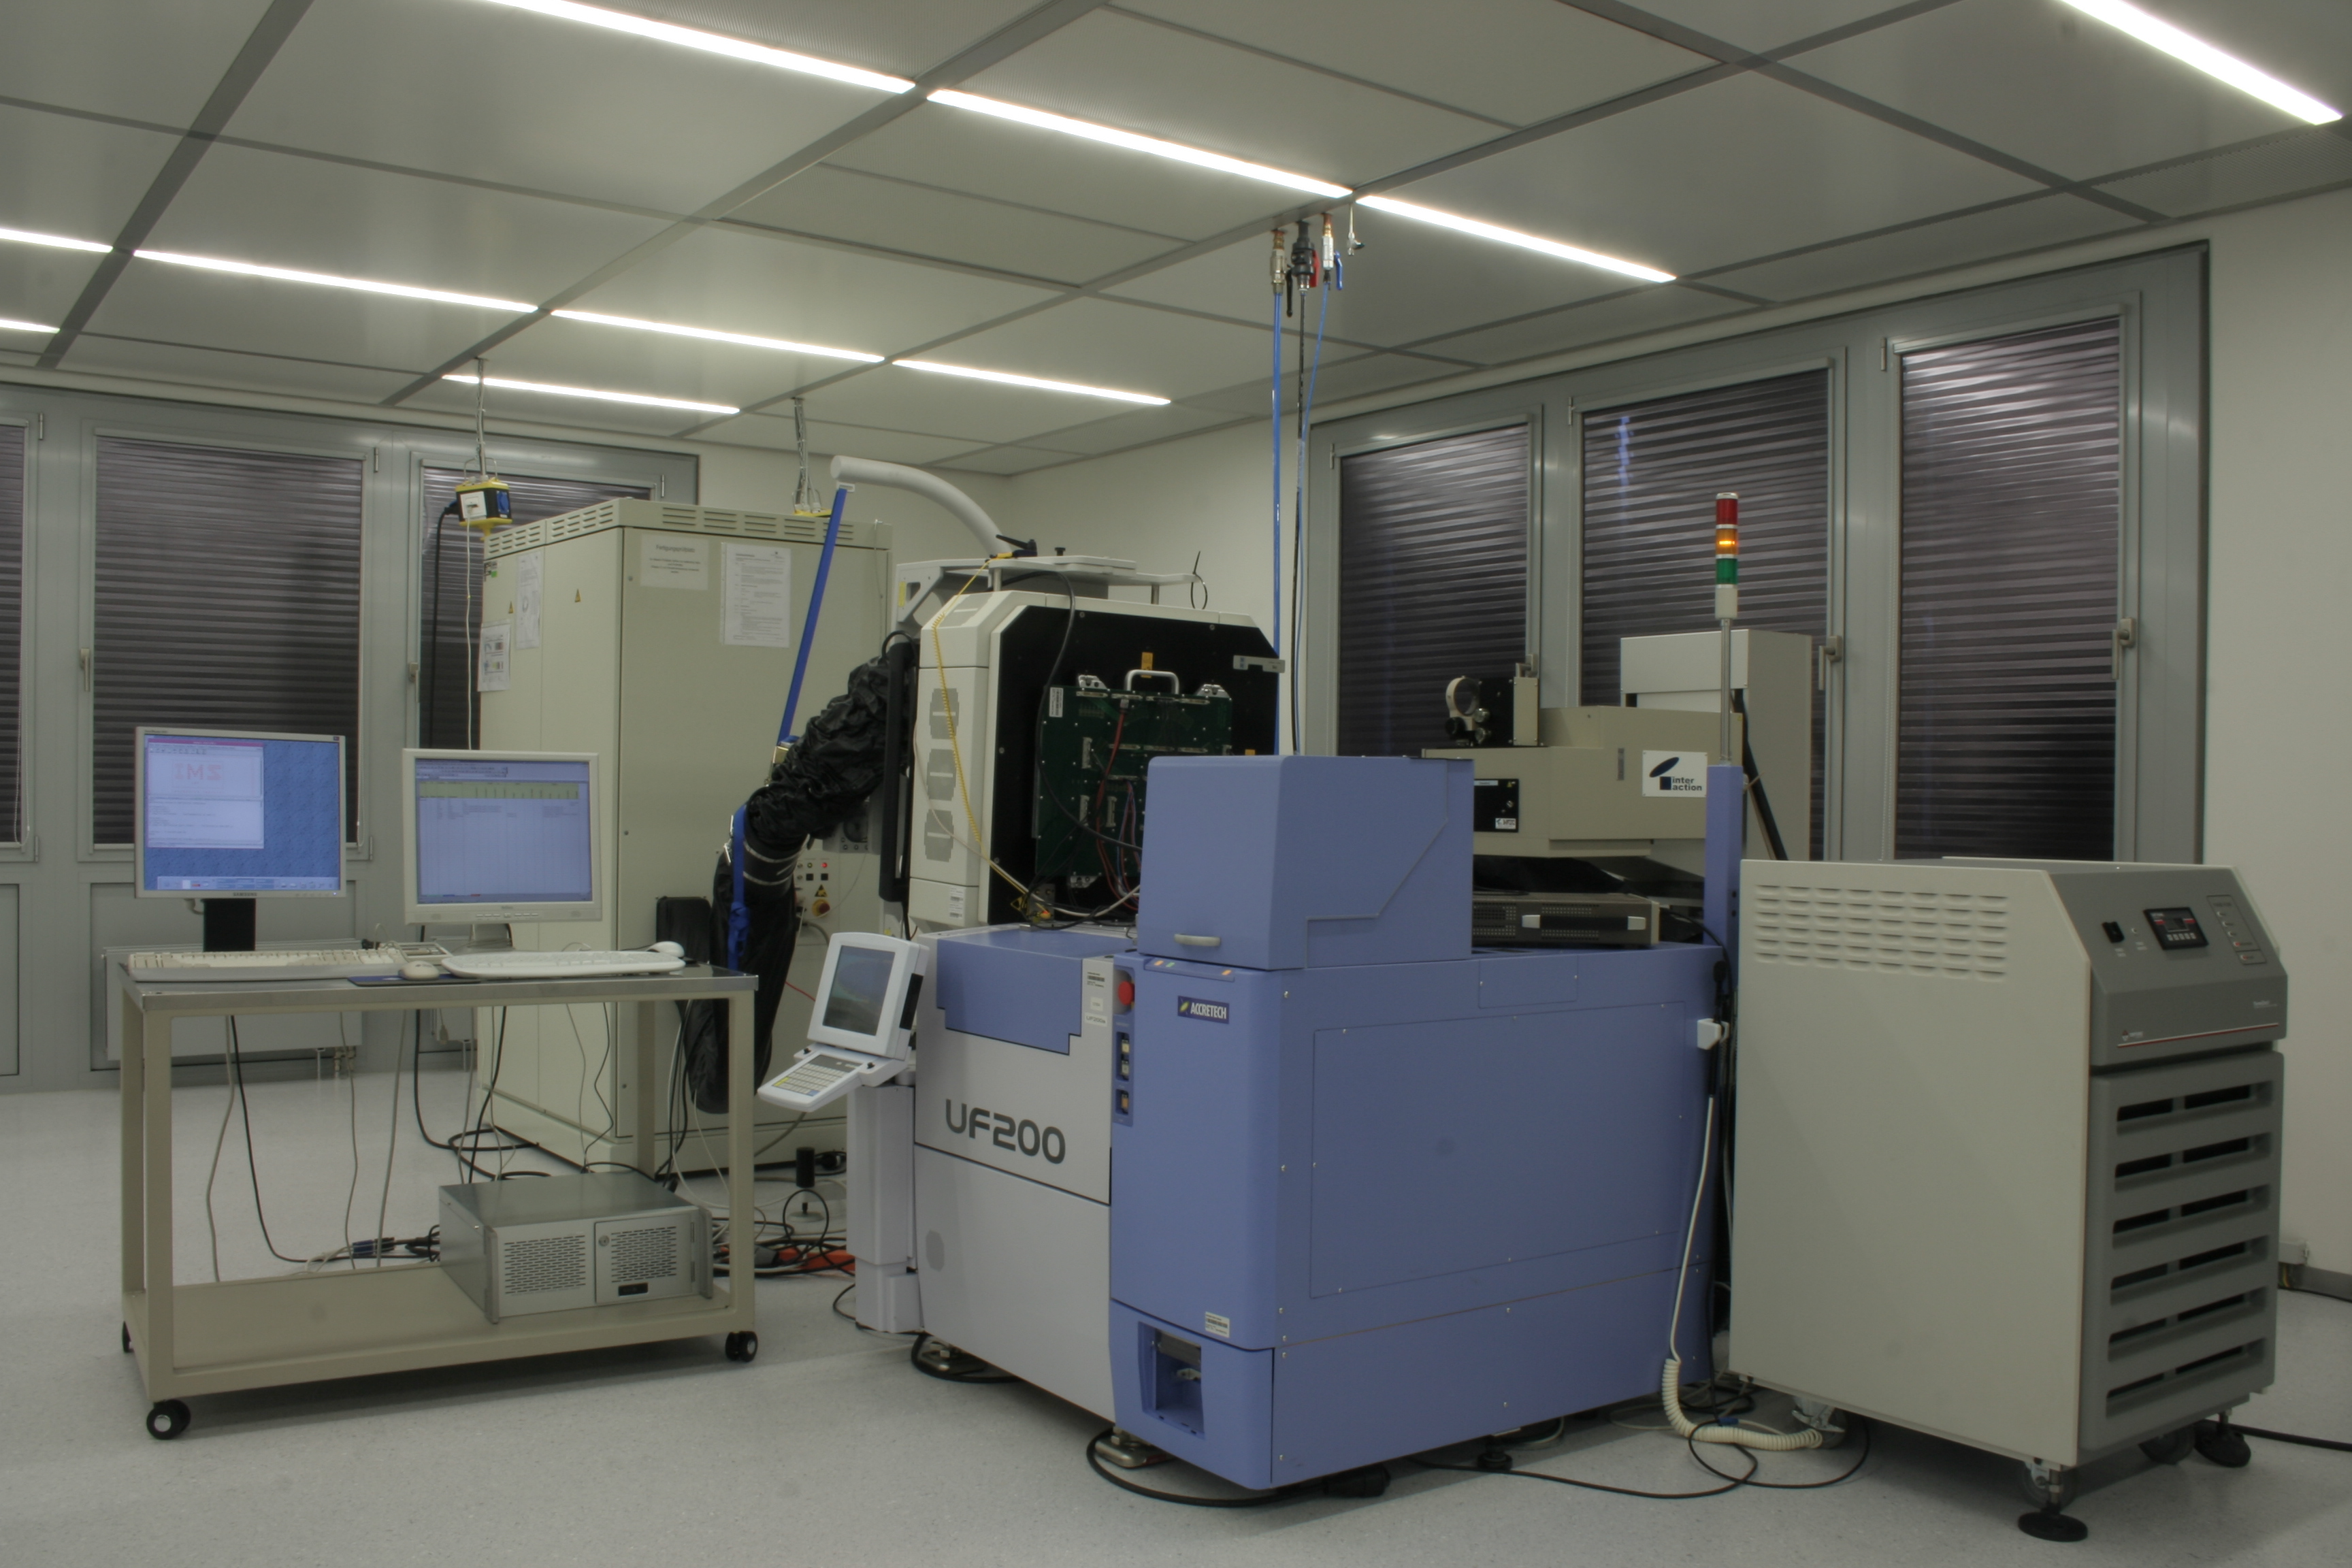 System for automatic wafer test at Fraunhofer IMS